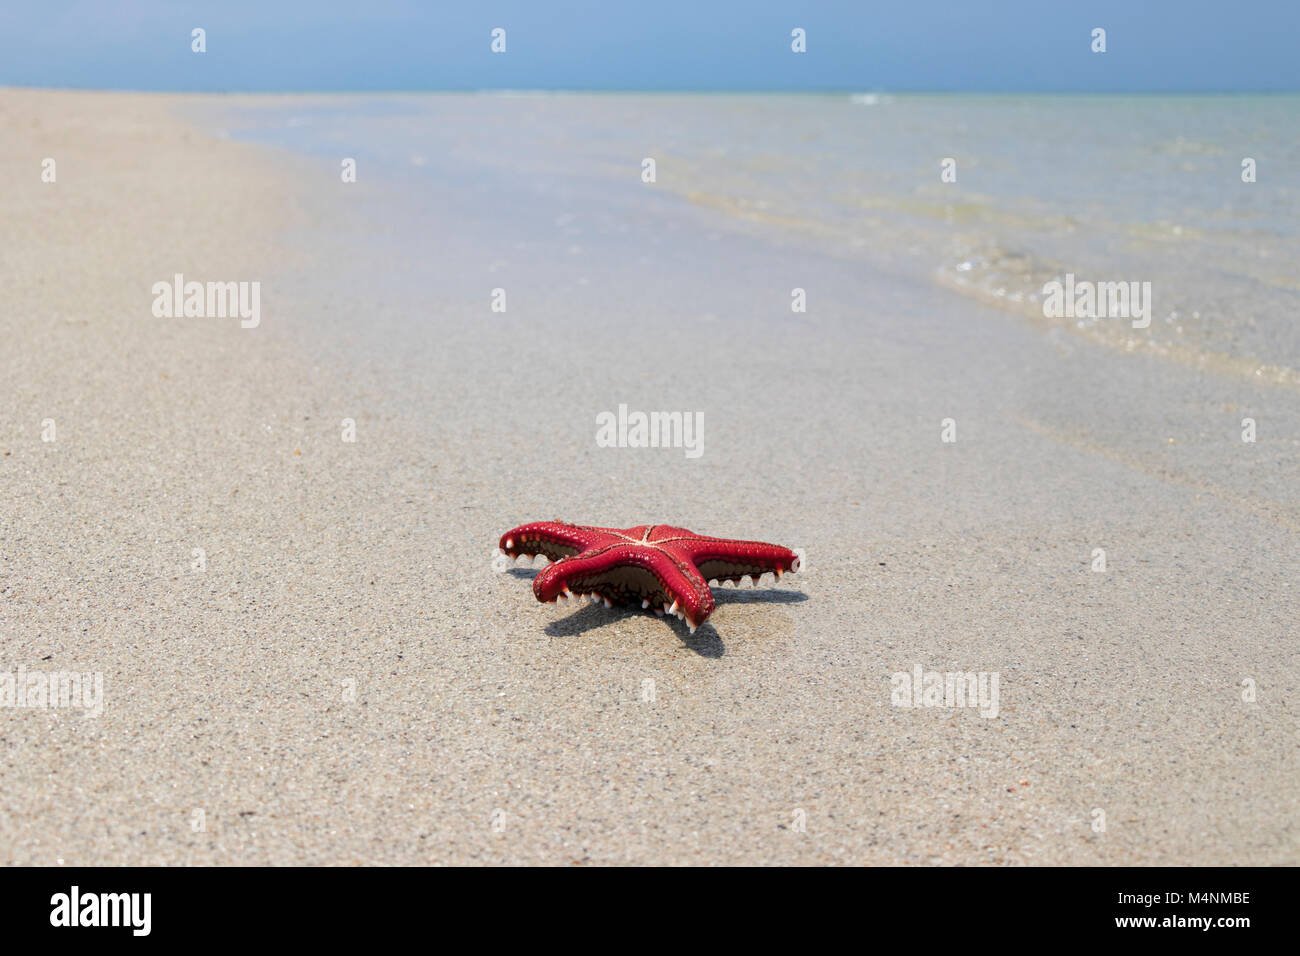 Colorful African red knob sea star or starfish on beach Stock Photo